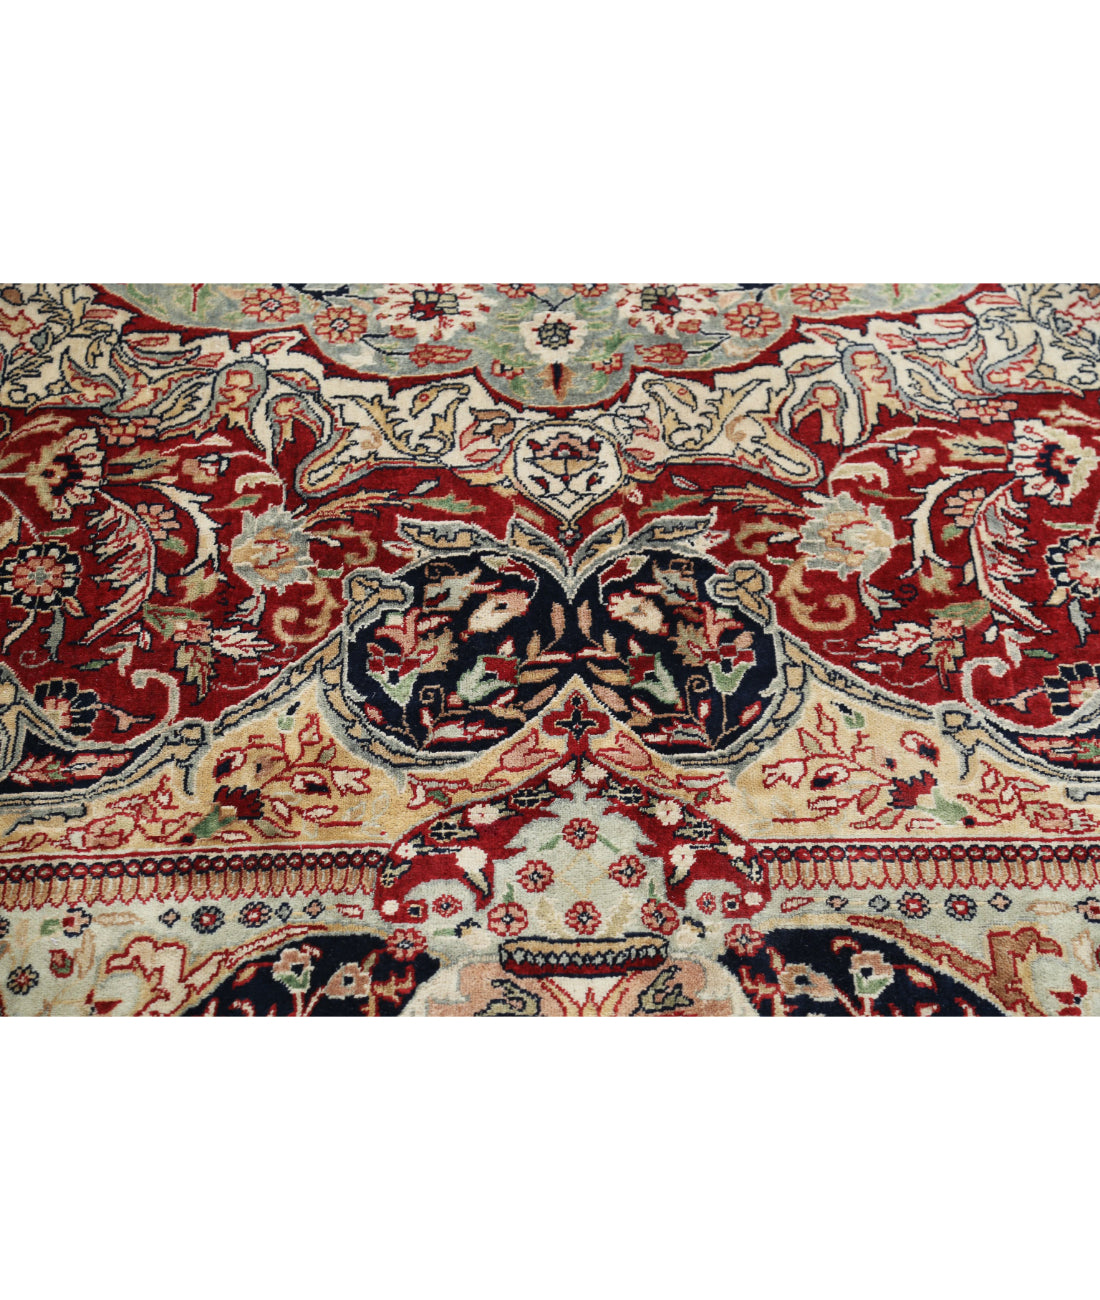 Hand Knotted Persian Kashmar Wool Rug - 7'9'' x 11'7'' 7'9'' x 11'7'' (233 X 348) / Red / Blue